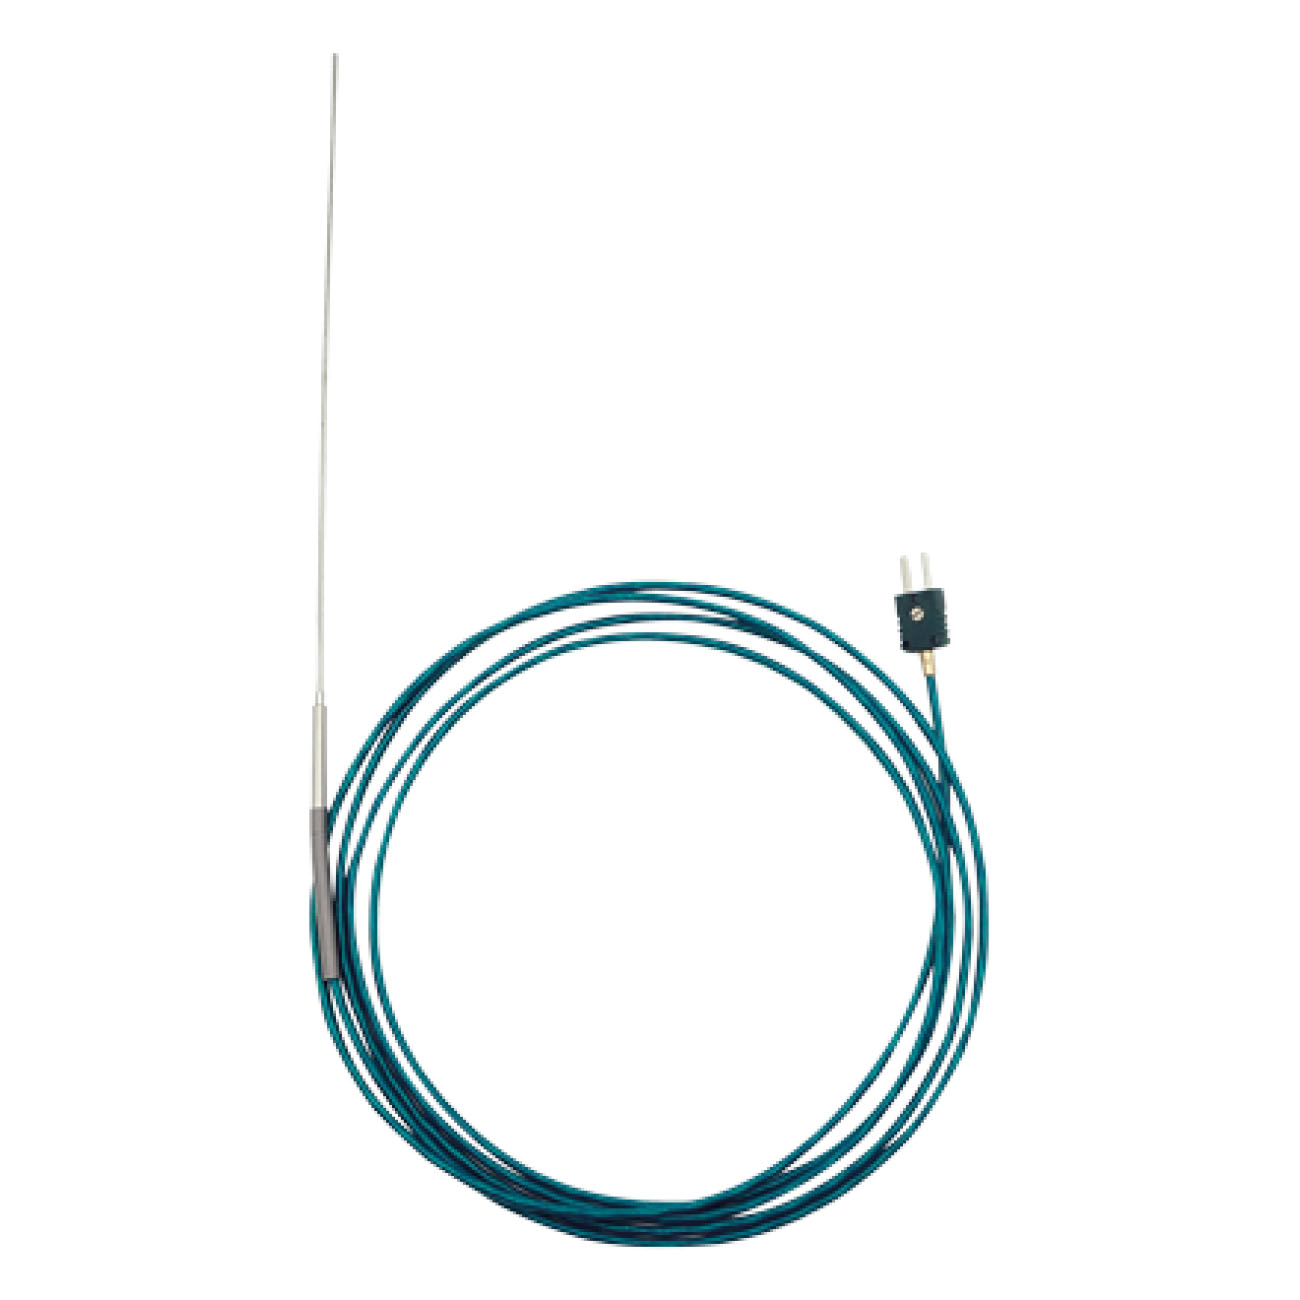 SFKI K Thermocouple temperature probe with deformable sleeved contact tip with cable